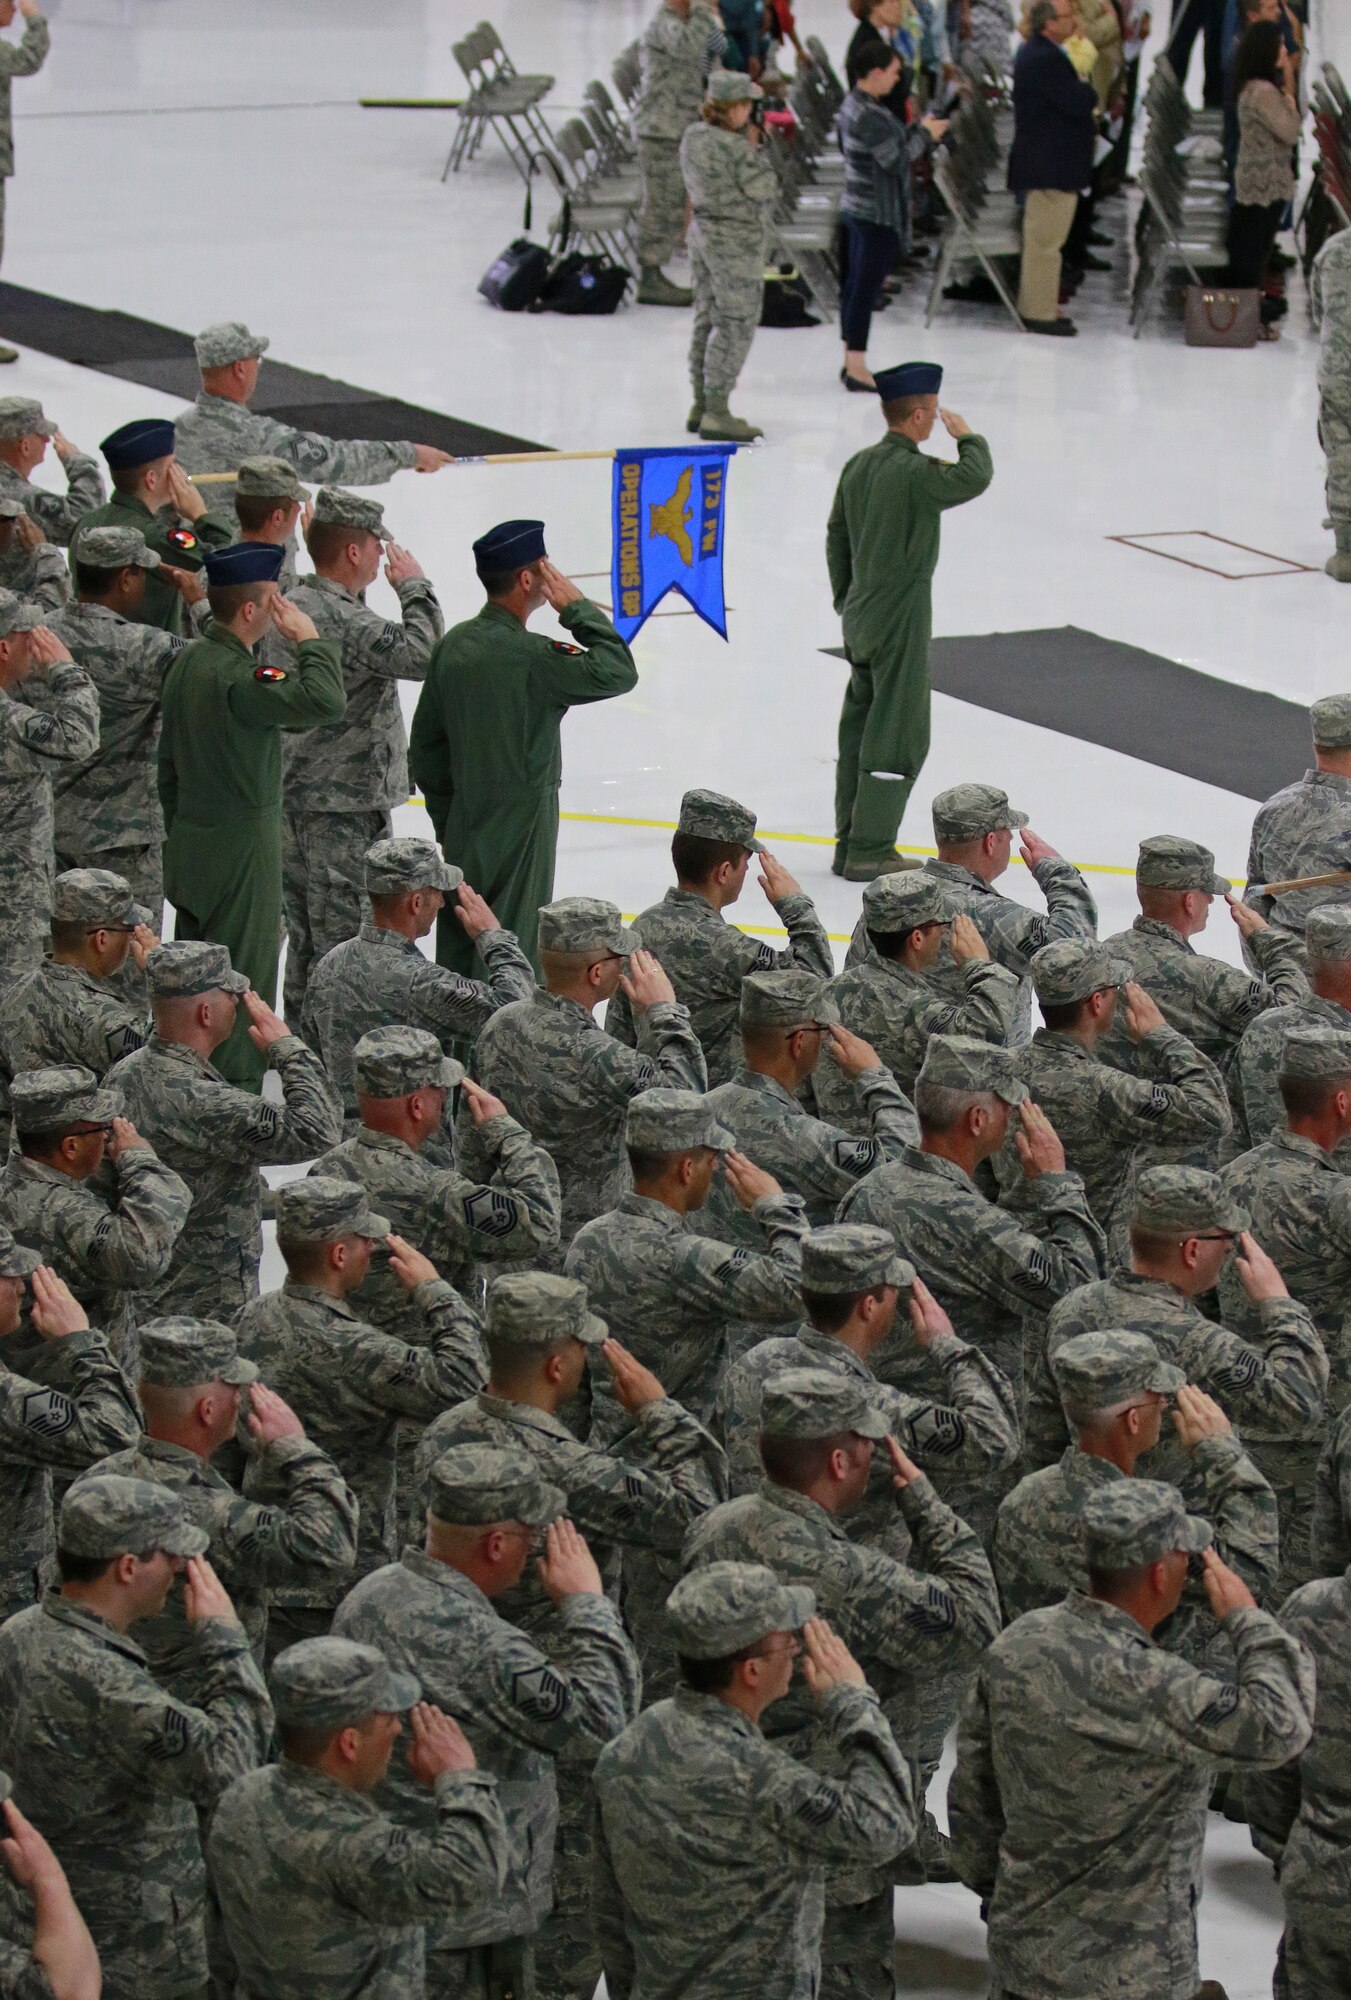 The assembled Airmen of the 173rd Fighter Wing render a salute to the U.S. Flag during a change of command ceremony in which Col. Jeffrey Smith accepted the helm from Brig. Gen. Kirk Pierce April 3, 2016 at Kingsley Field in Klamath Falls, Ore.  Smith, the former maintenance group commander, brings with him a wealth of experience with just over 20 years of service.   (U.S. Air National Guard photo by Tech. Sgt. Jefferson Thompson/released)